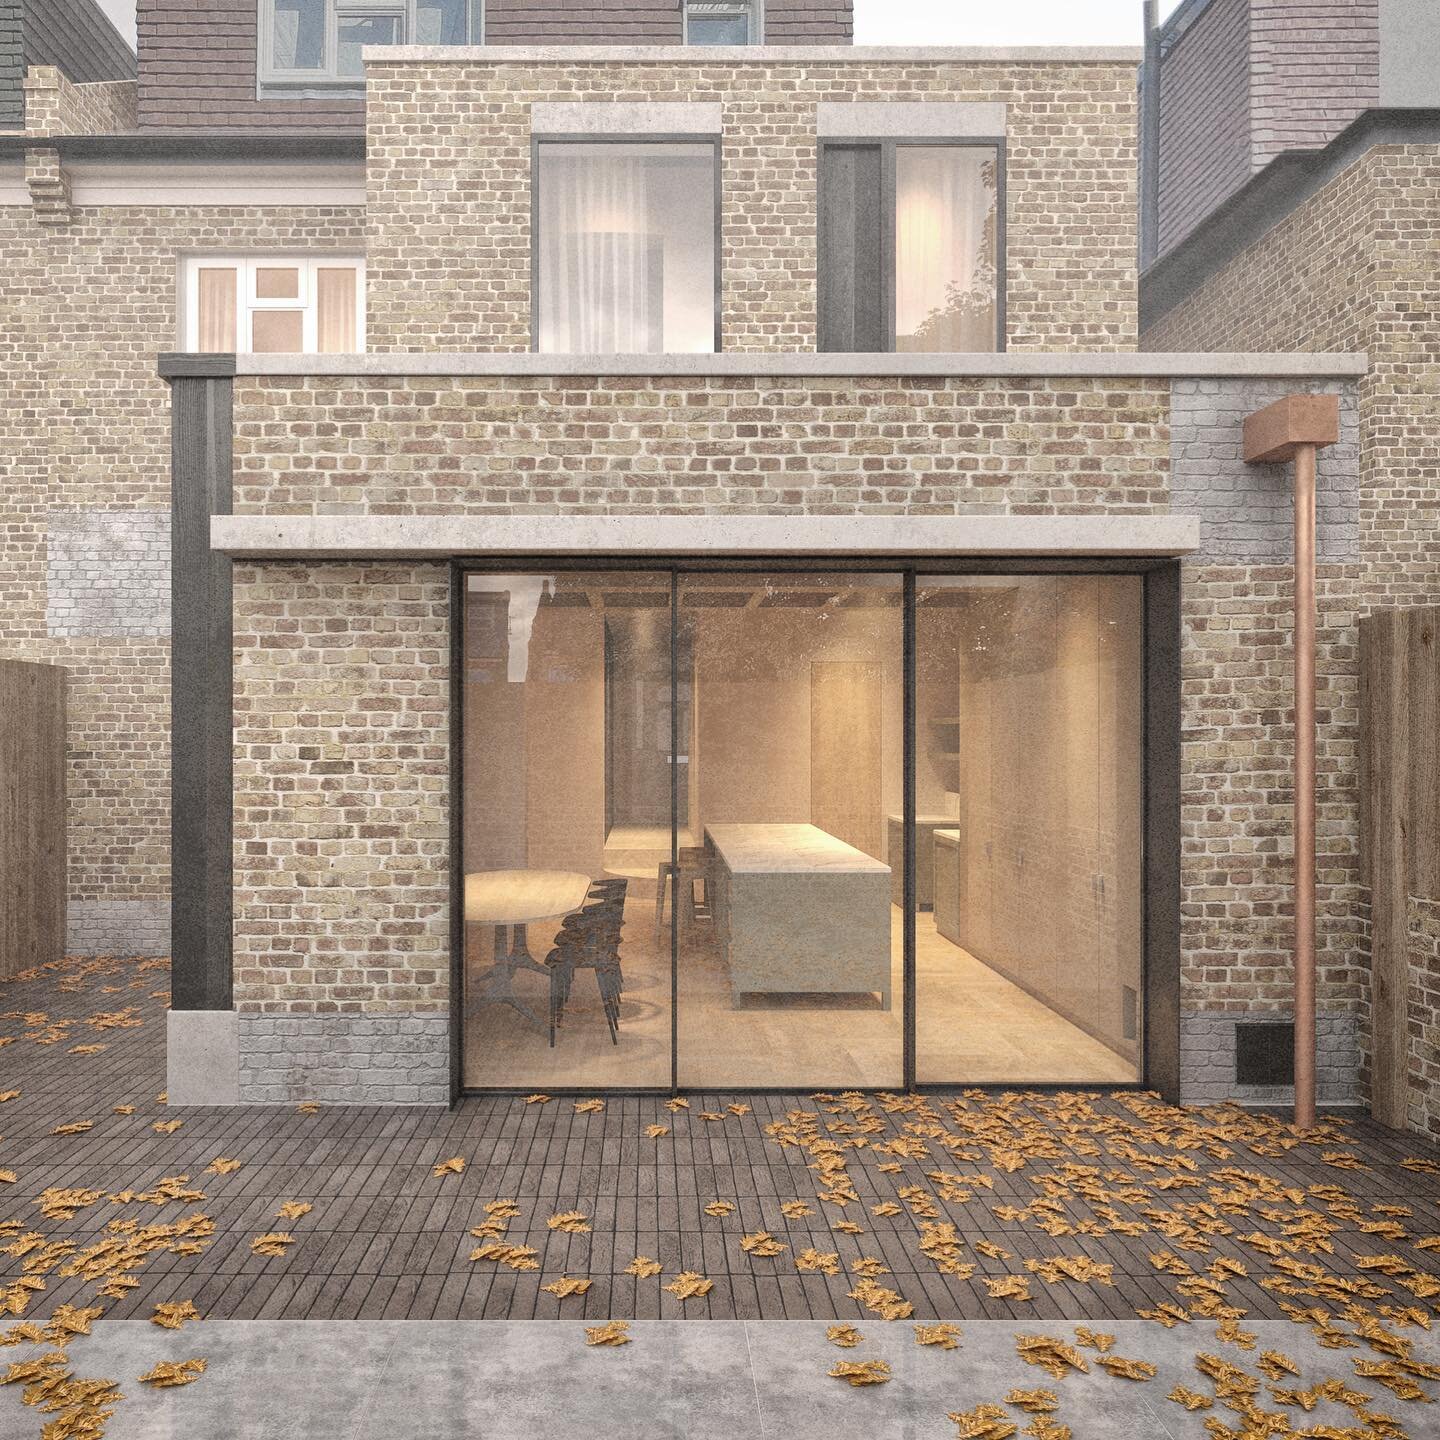 Starting off 2023 with work-in-progress #renders of our latest project in London. 

The existing extension is retained, the floor lowered and the windows upgraded. The south and west facing facades are then &lsquo;re-clothed&rsquo; with additions to 